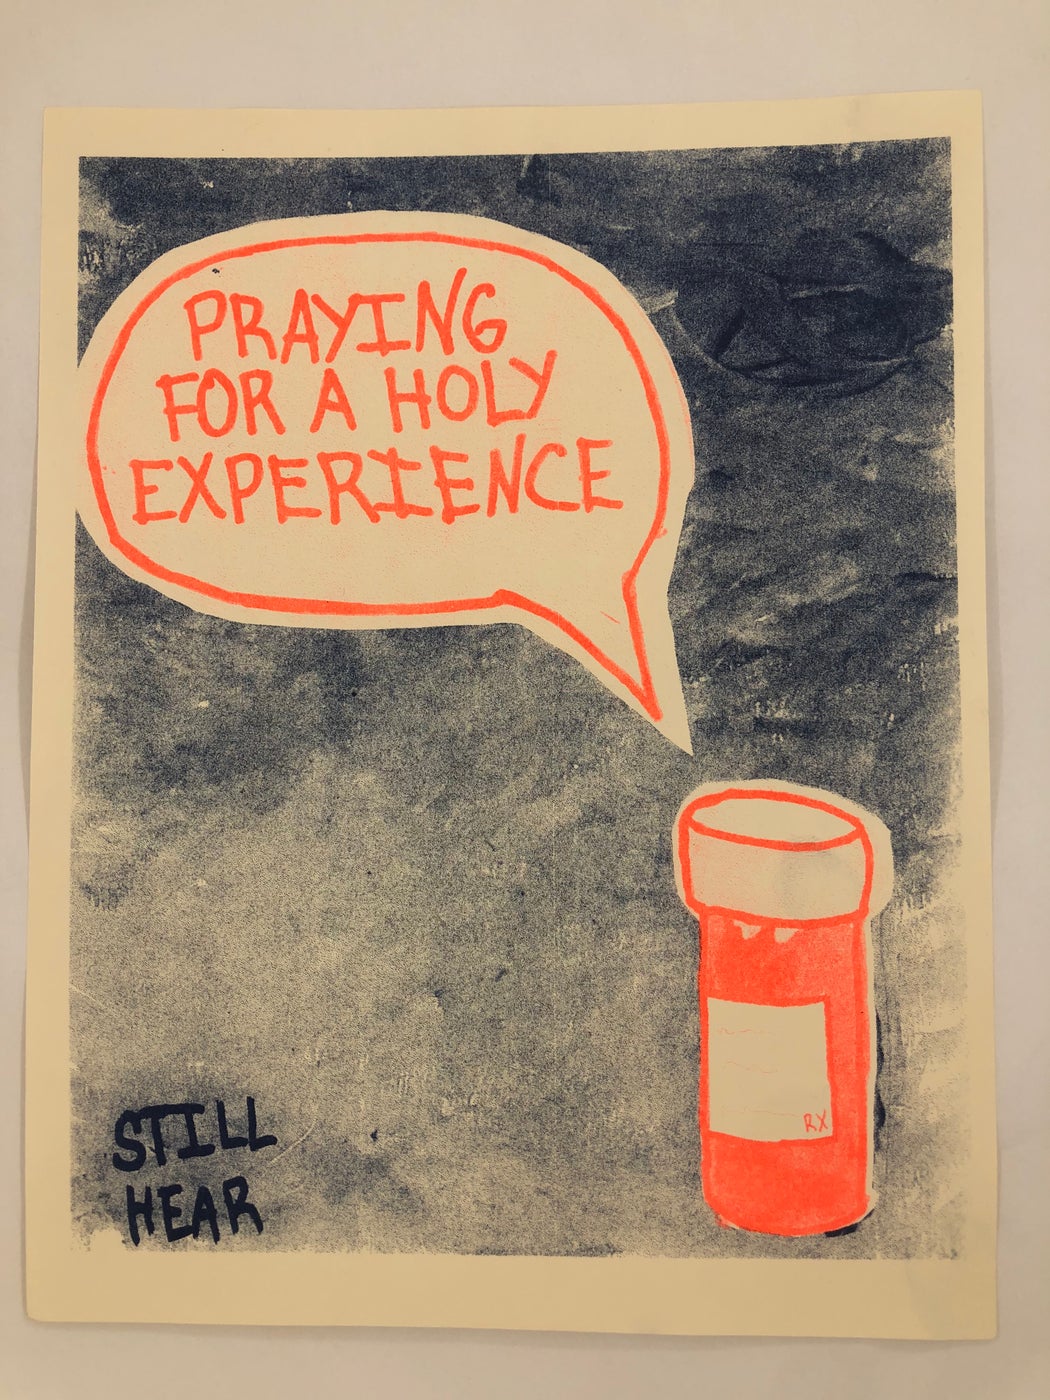 Still Hear "Praying for a Holy Experience" Print(2020)